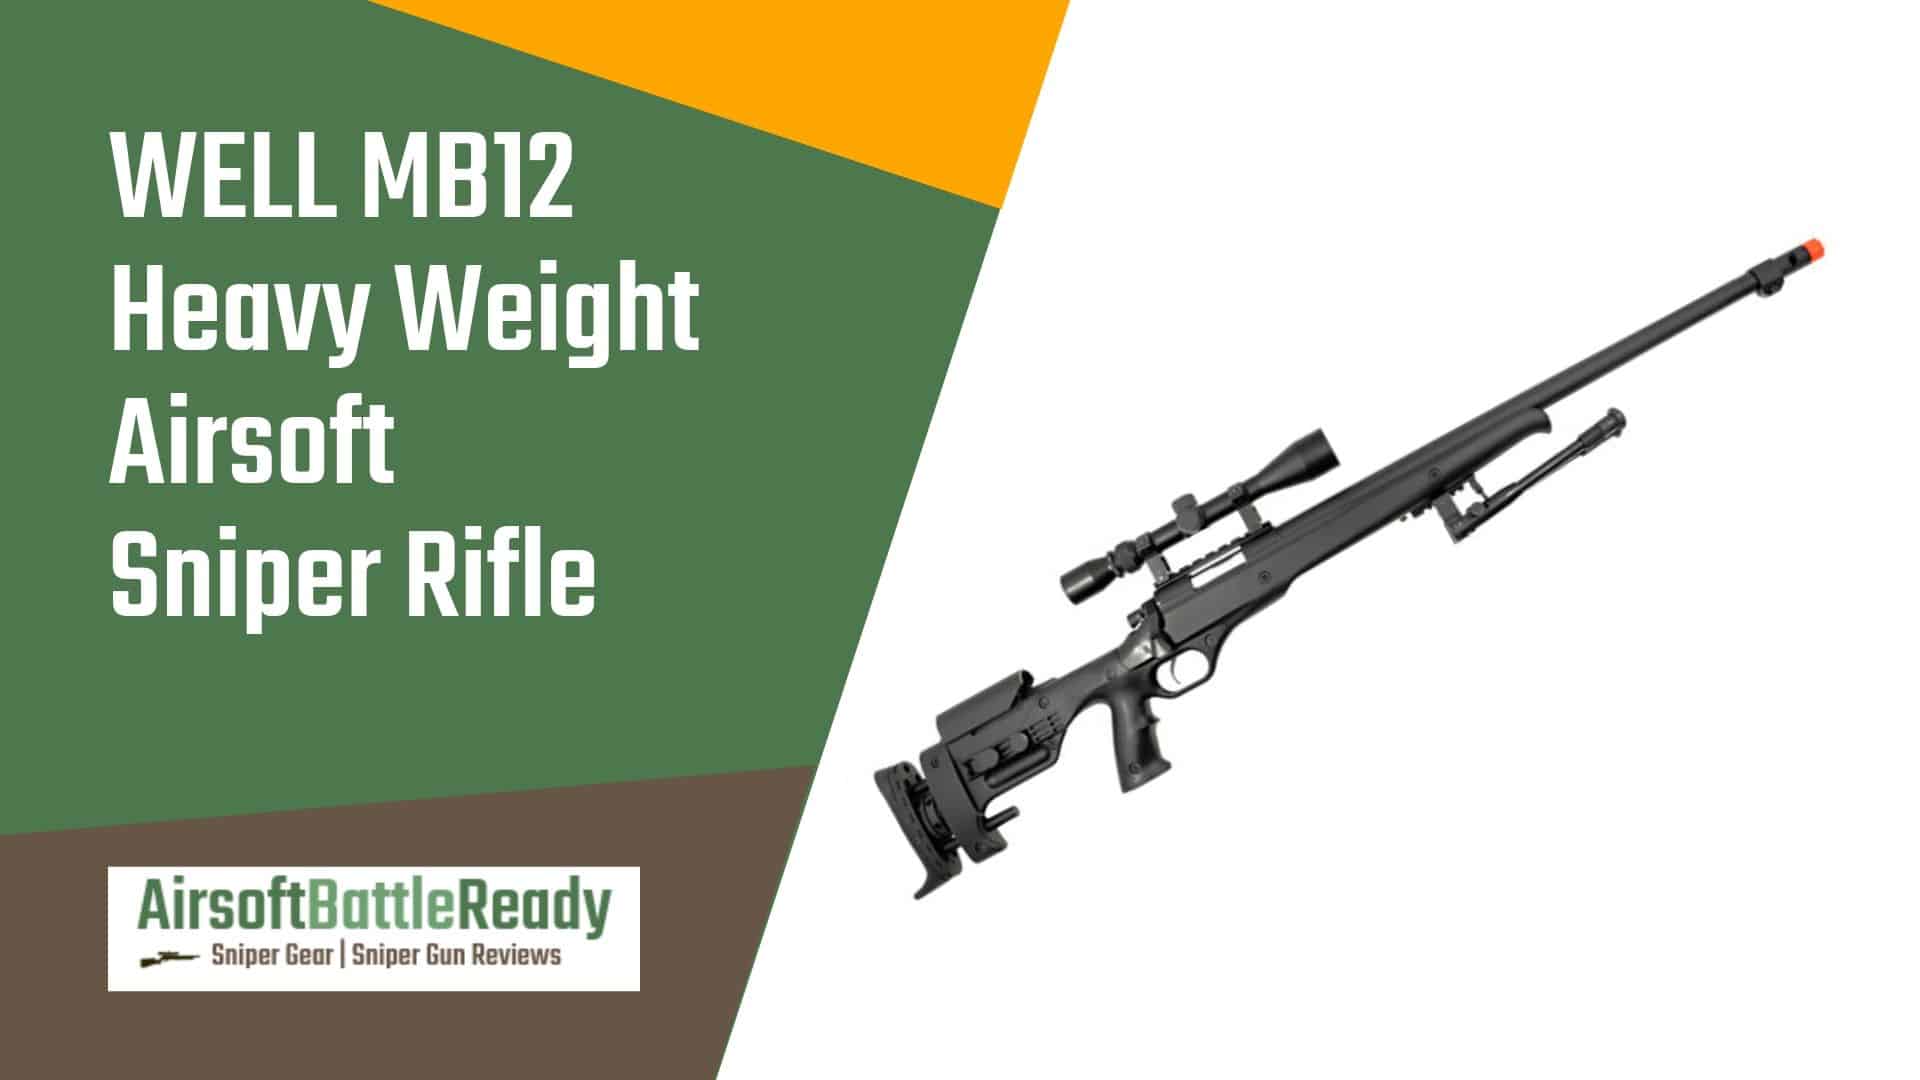 WELL MB12 Heavy Weight Airsoft Sniper Rifle Review - Airsoft Battle Ready